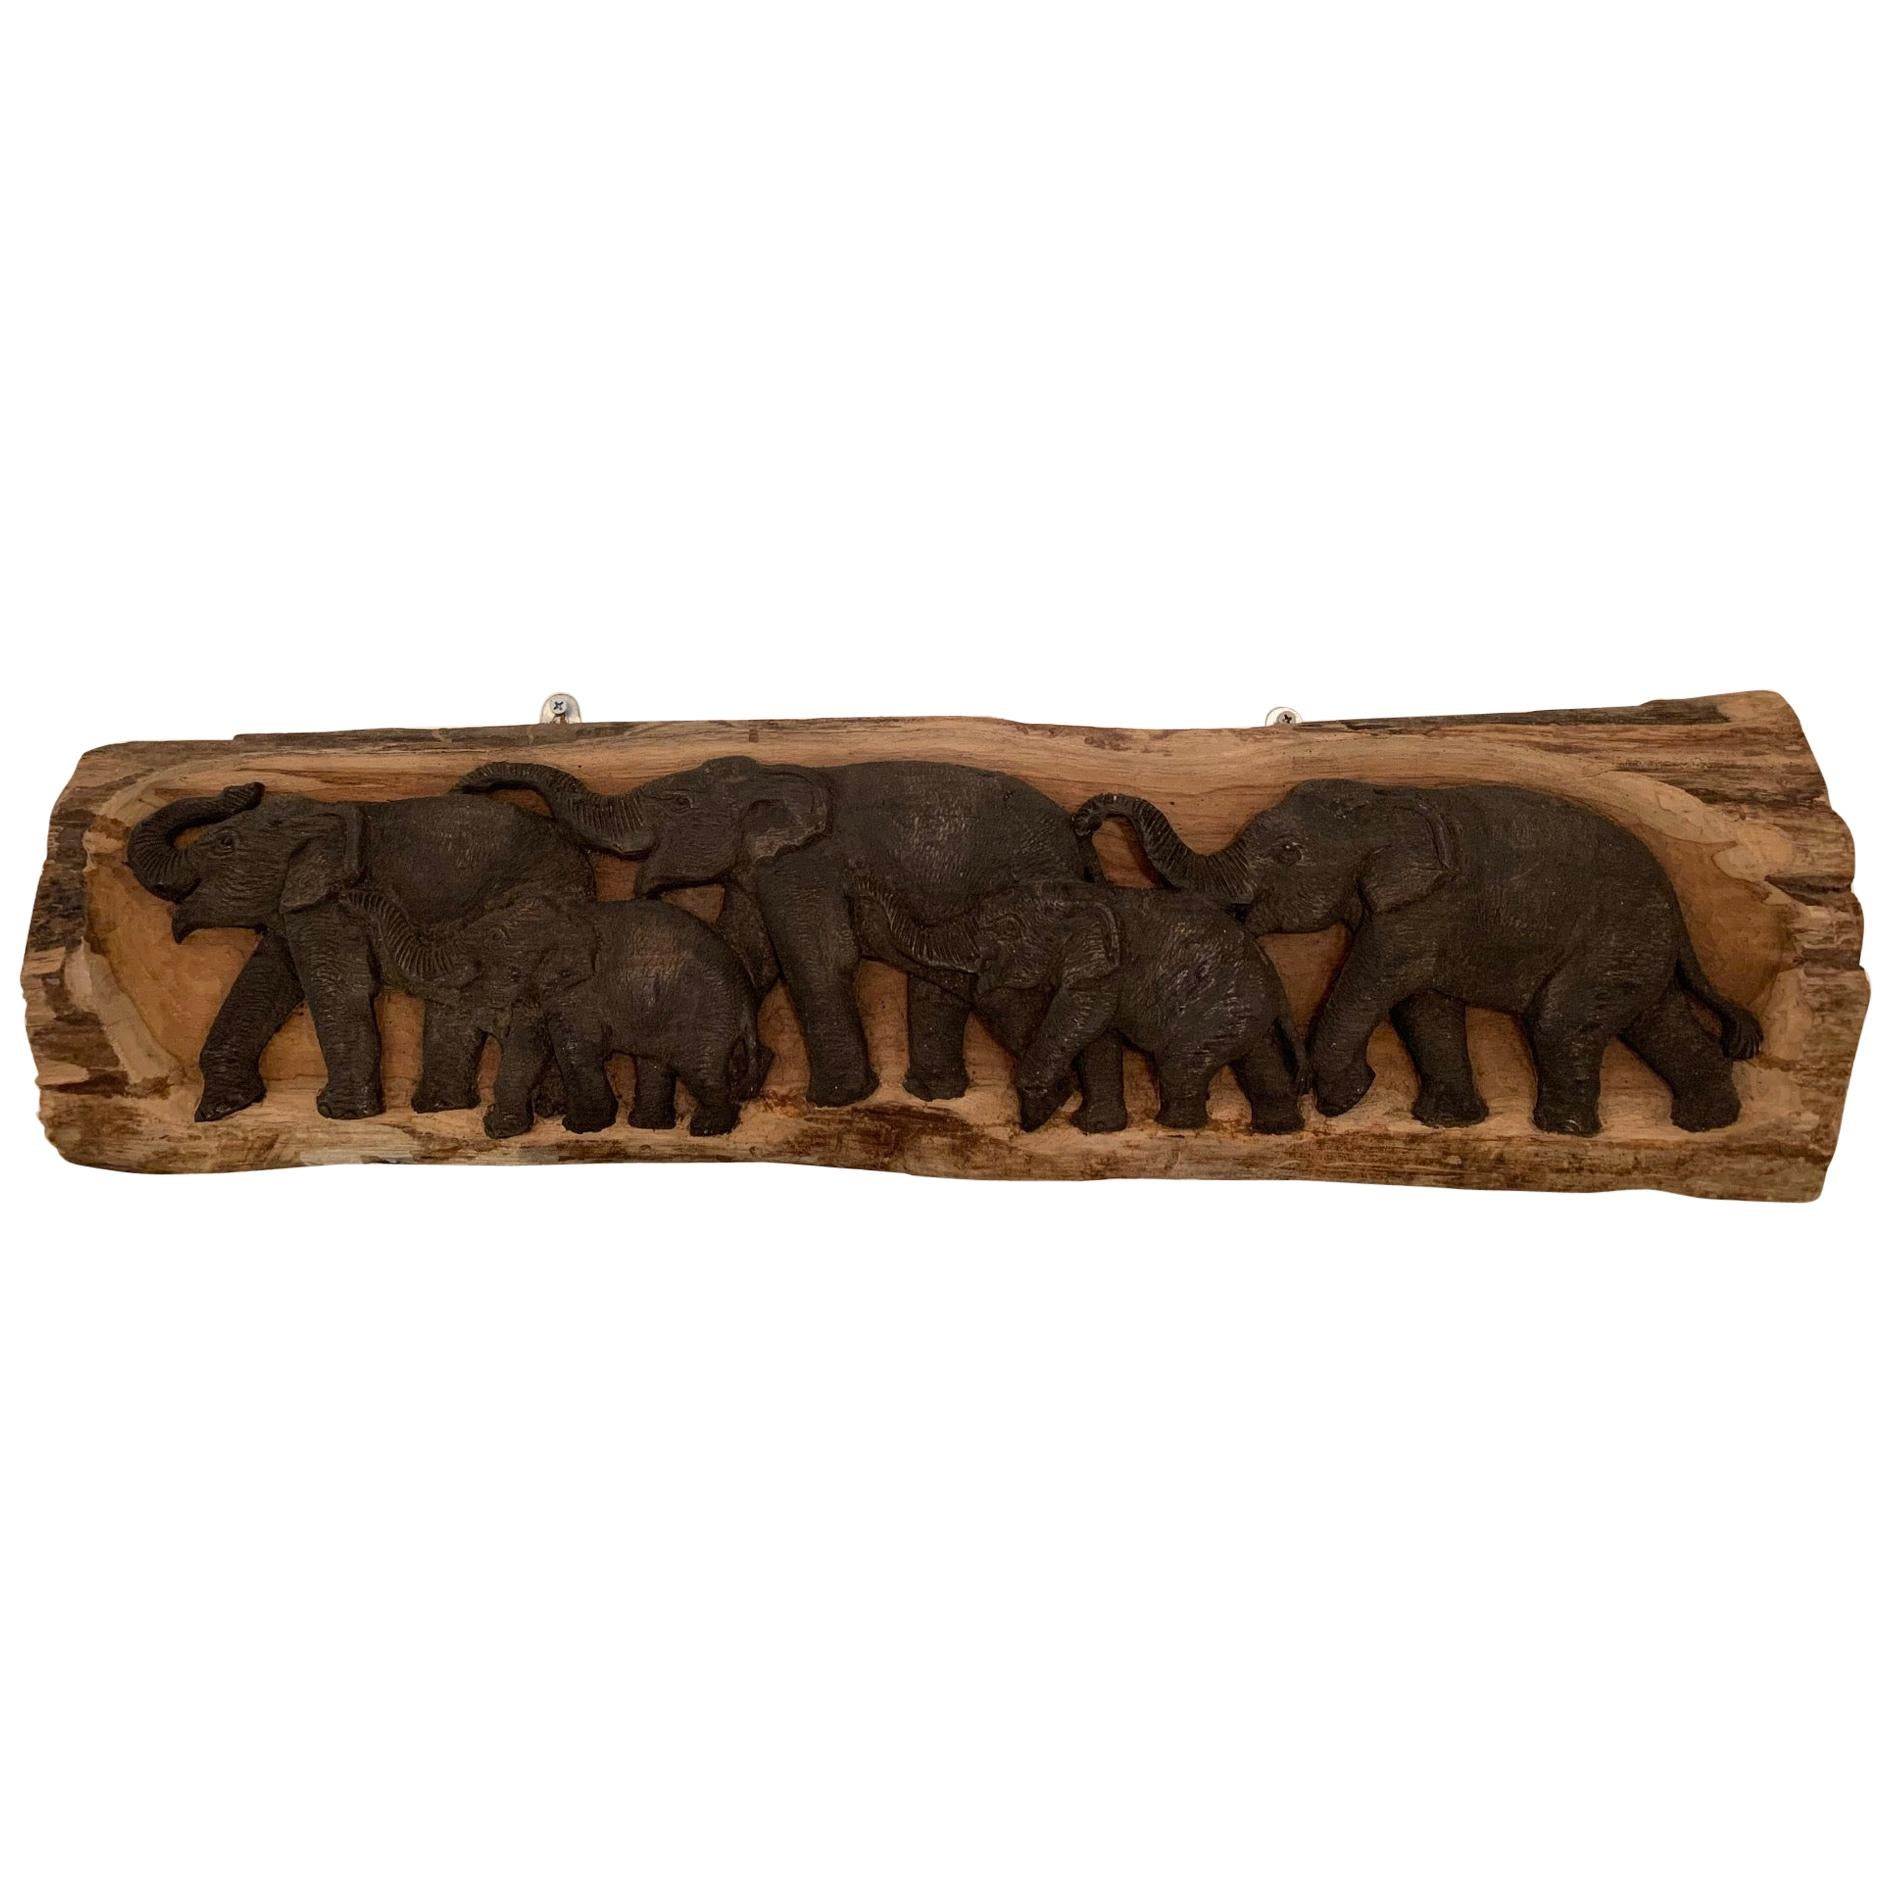 Delightful Carved Wood Long Horizontal Wall Relief Sculpture of Elephants For Sale